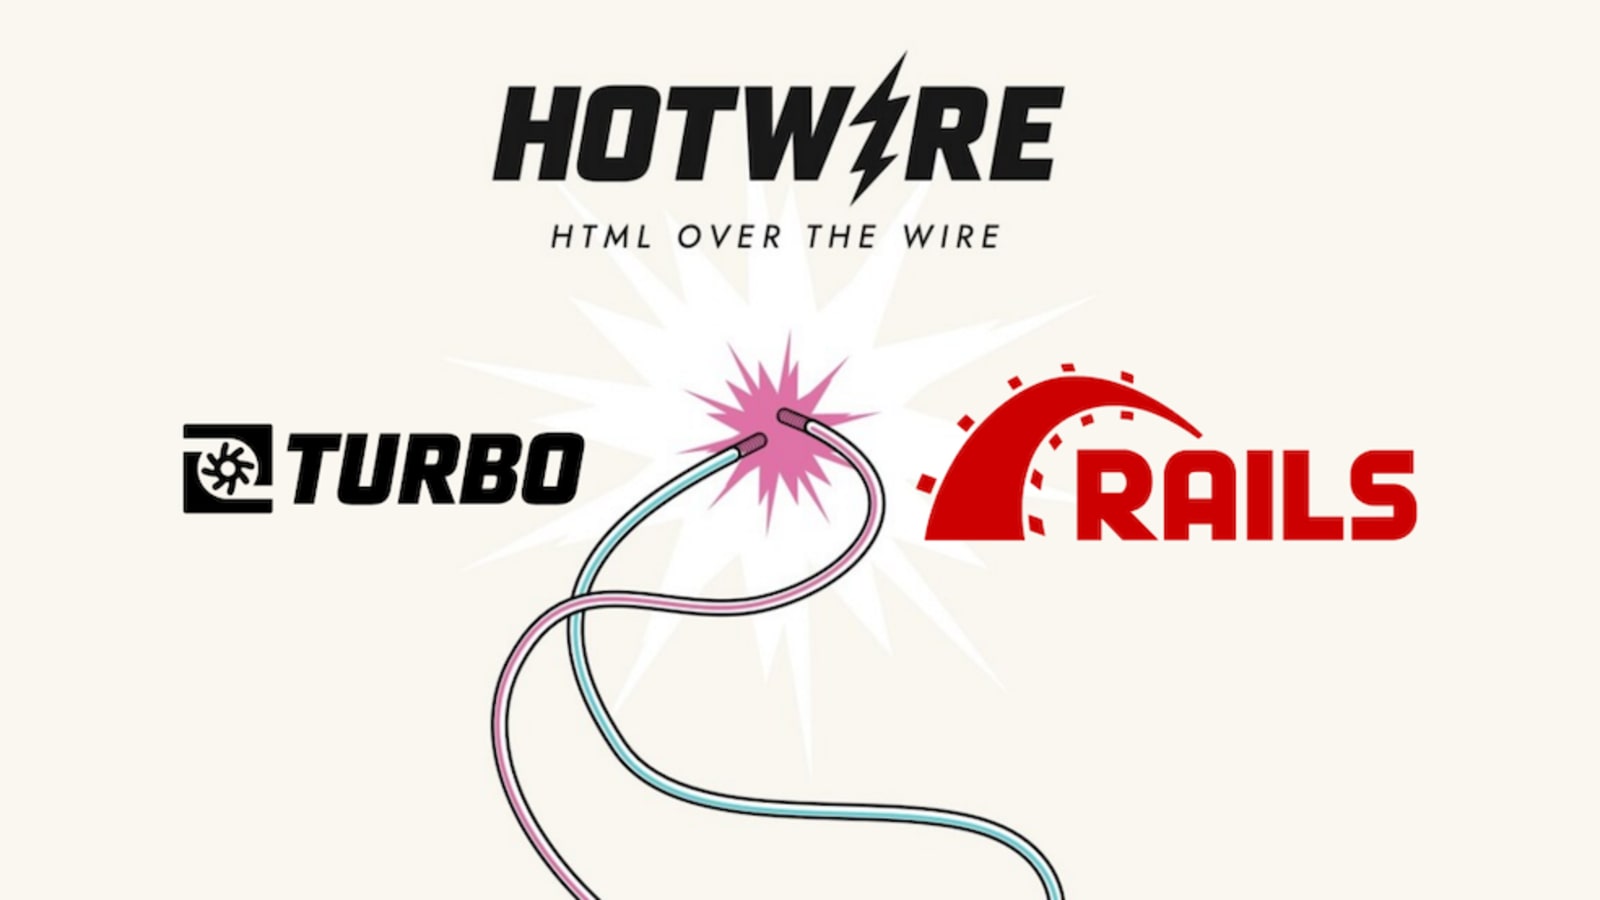 Load More Pagination in Rails with Hotwire Turbo Streams - DEV Community